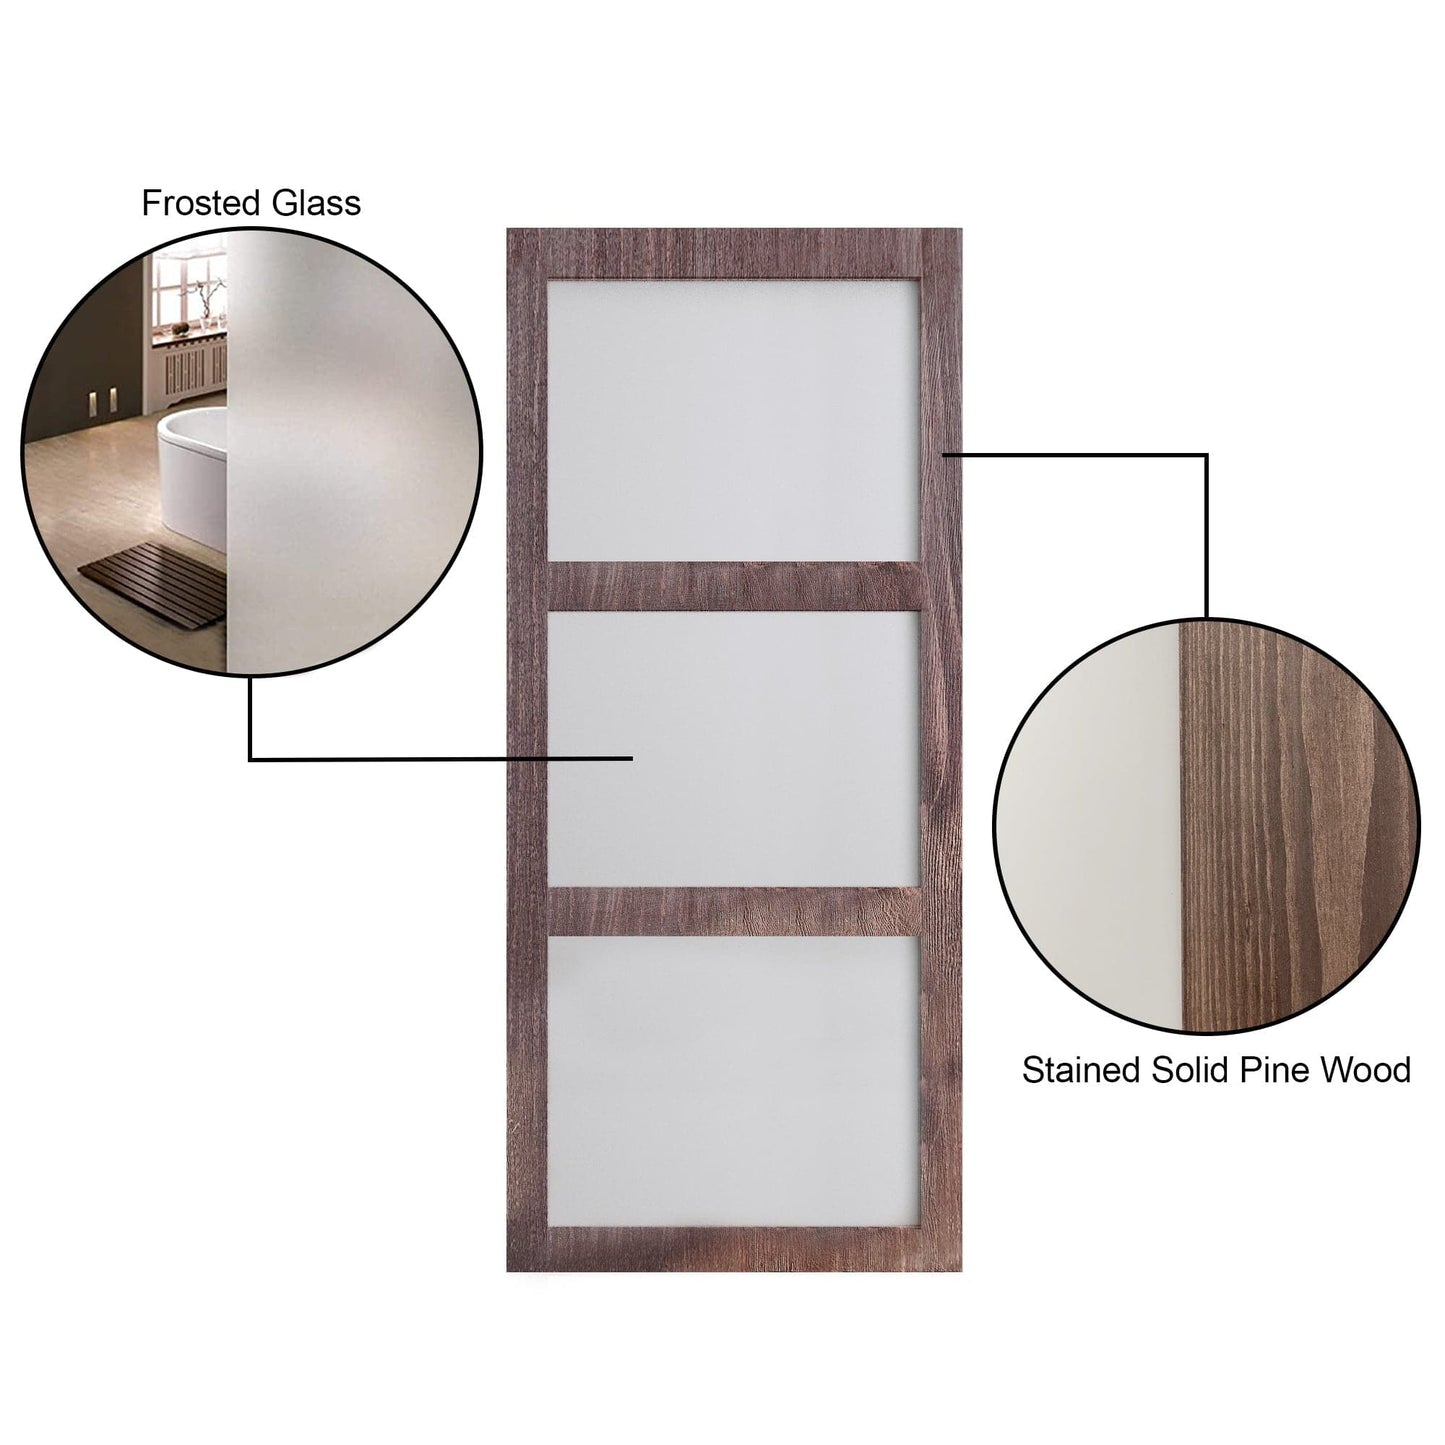 Assembled Wood/Frosted Glass Finished Barn Door 36"W*84"H Without Installation Hardware kit